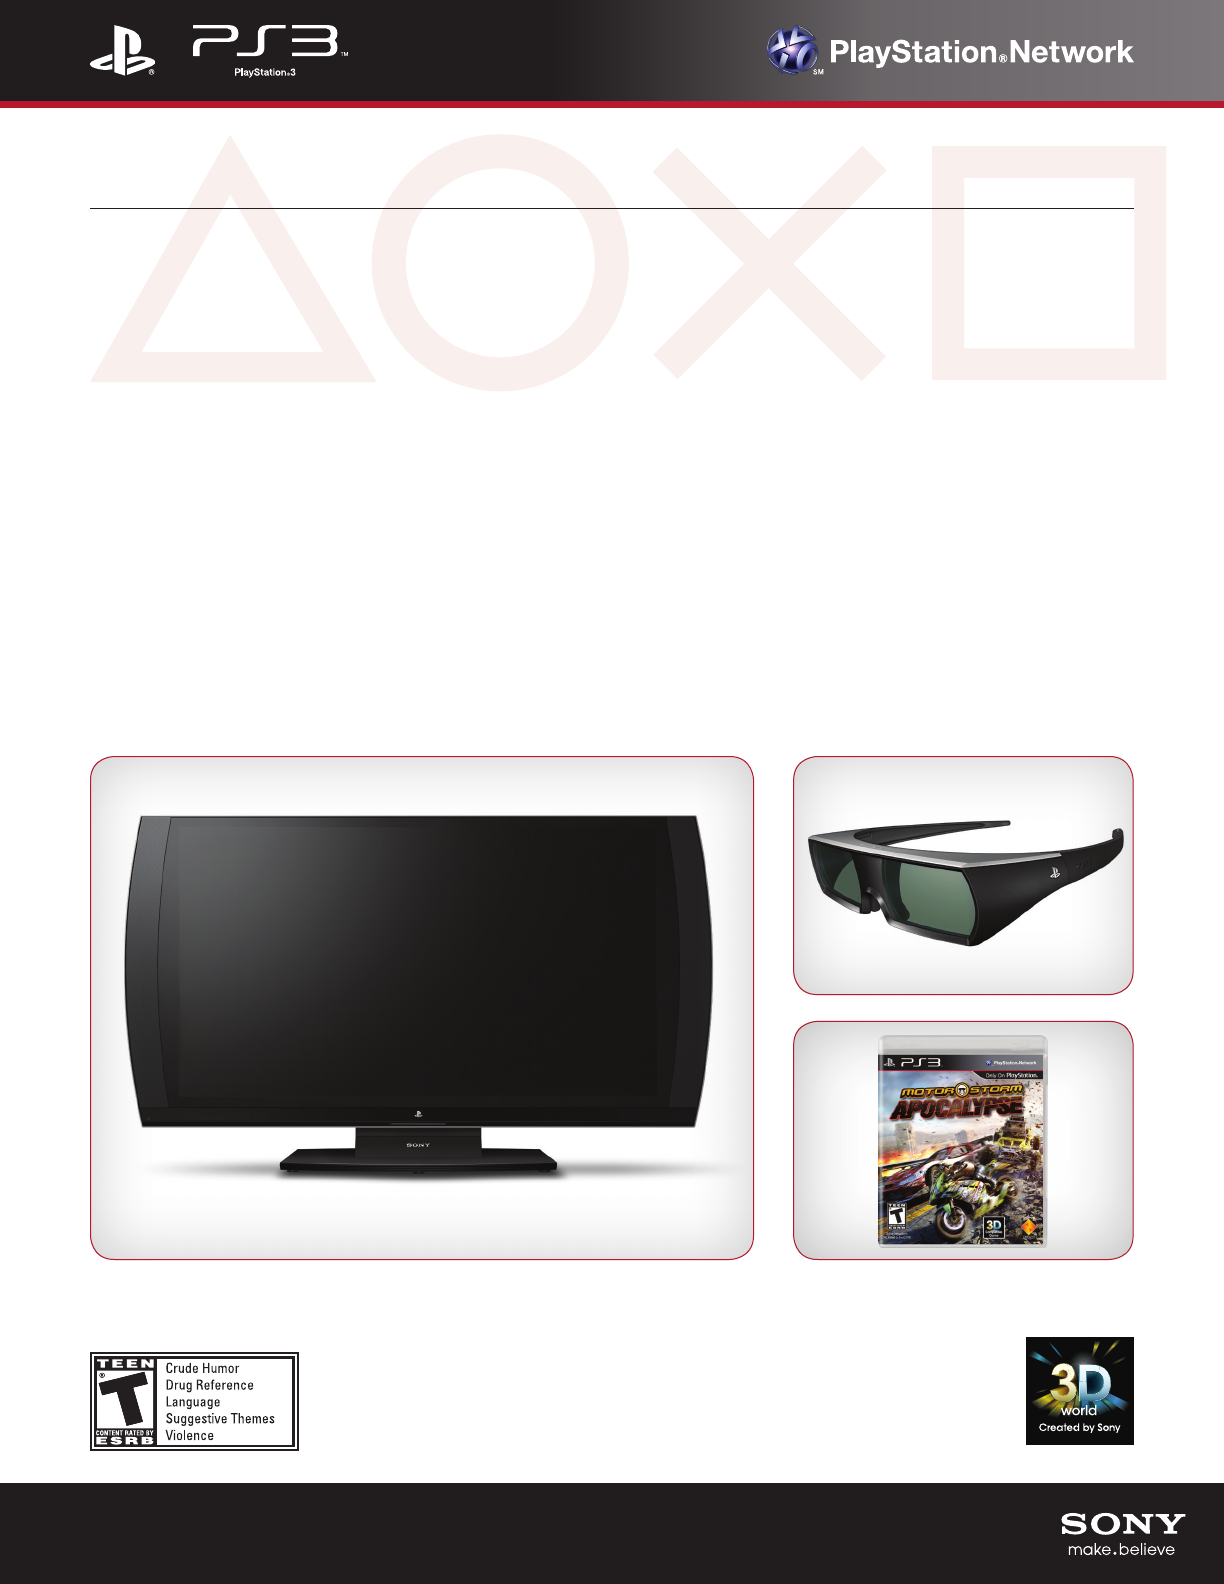 sony ps3 3d display